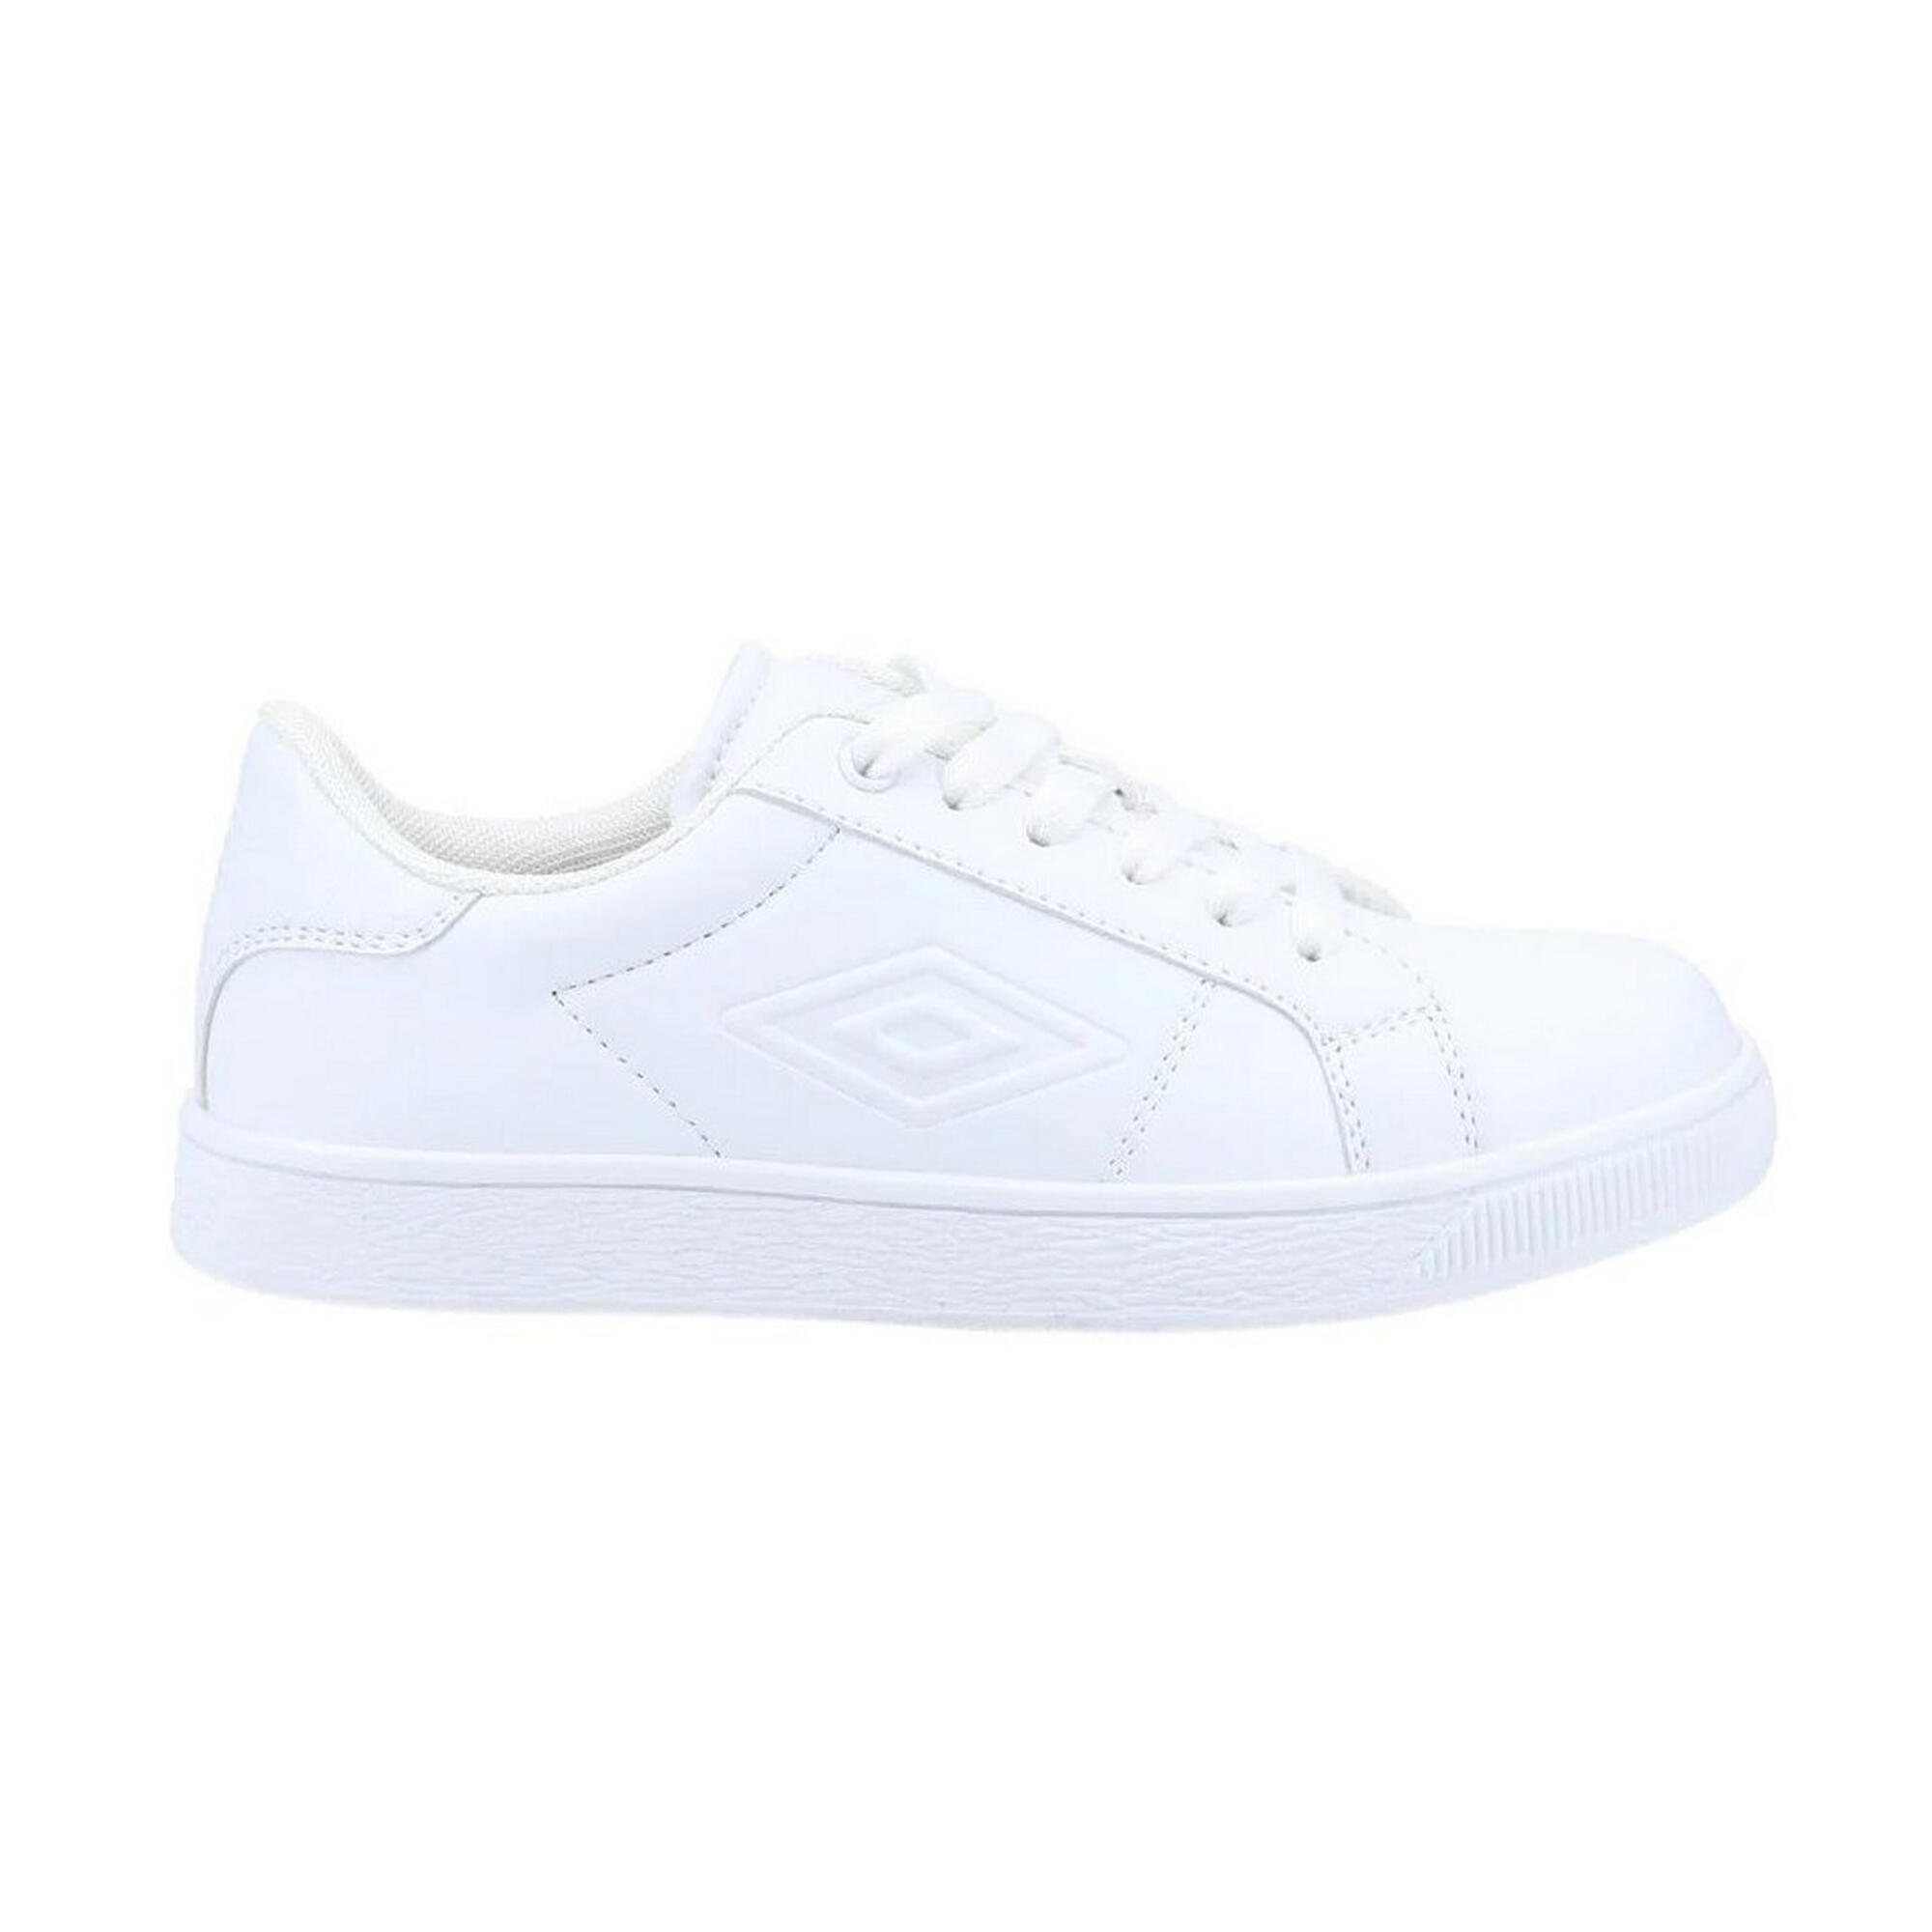 UMBRO Childrens/Kids Medway Lace Trainers (White)